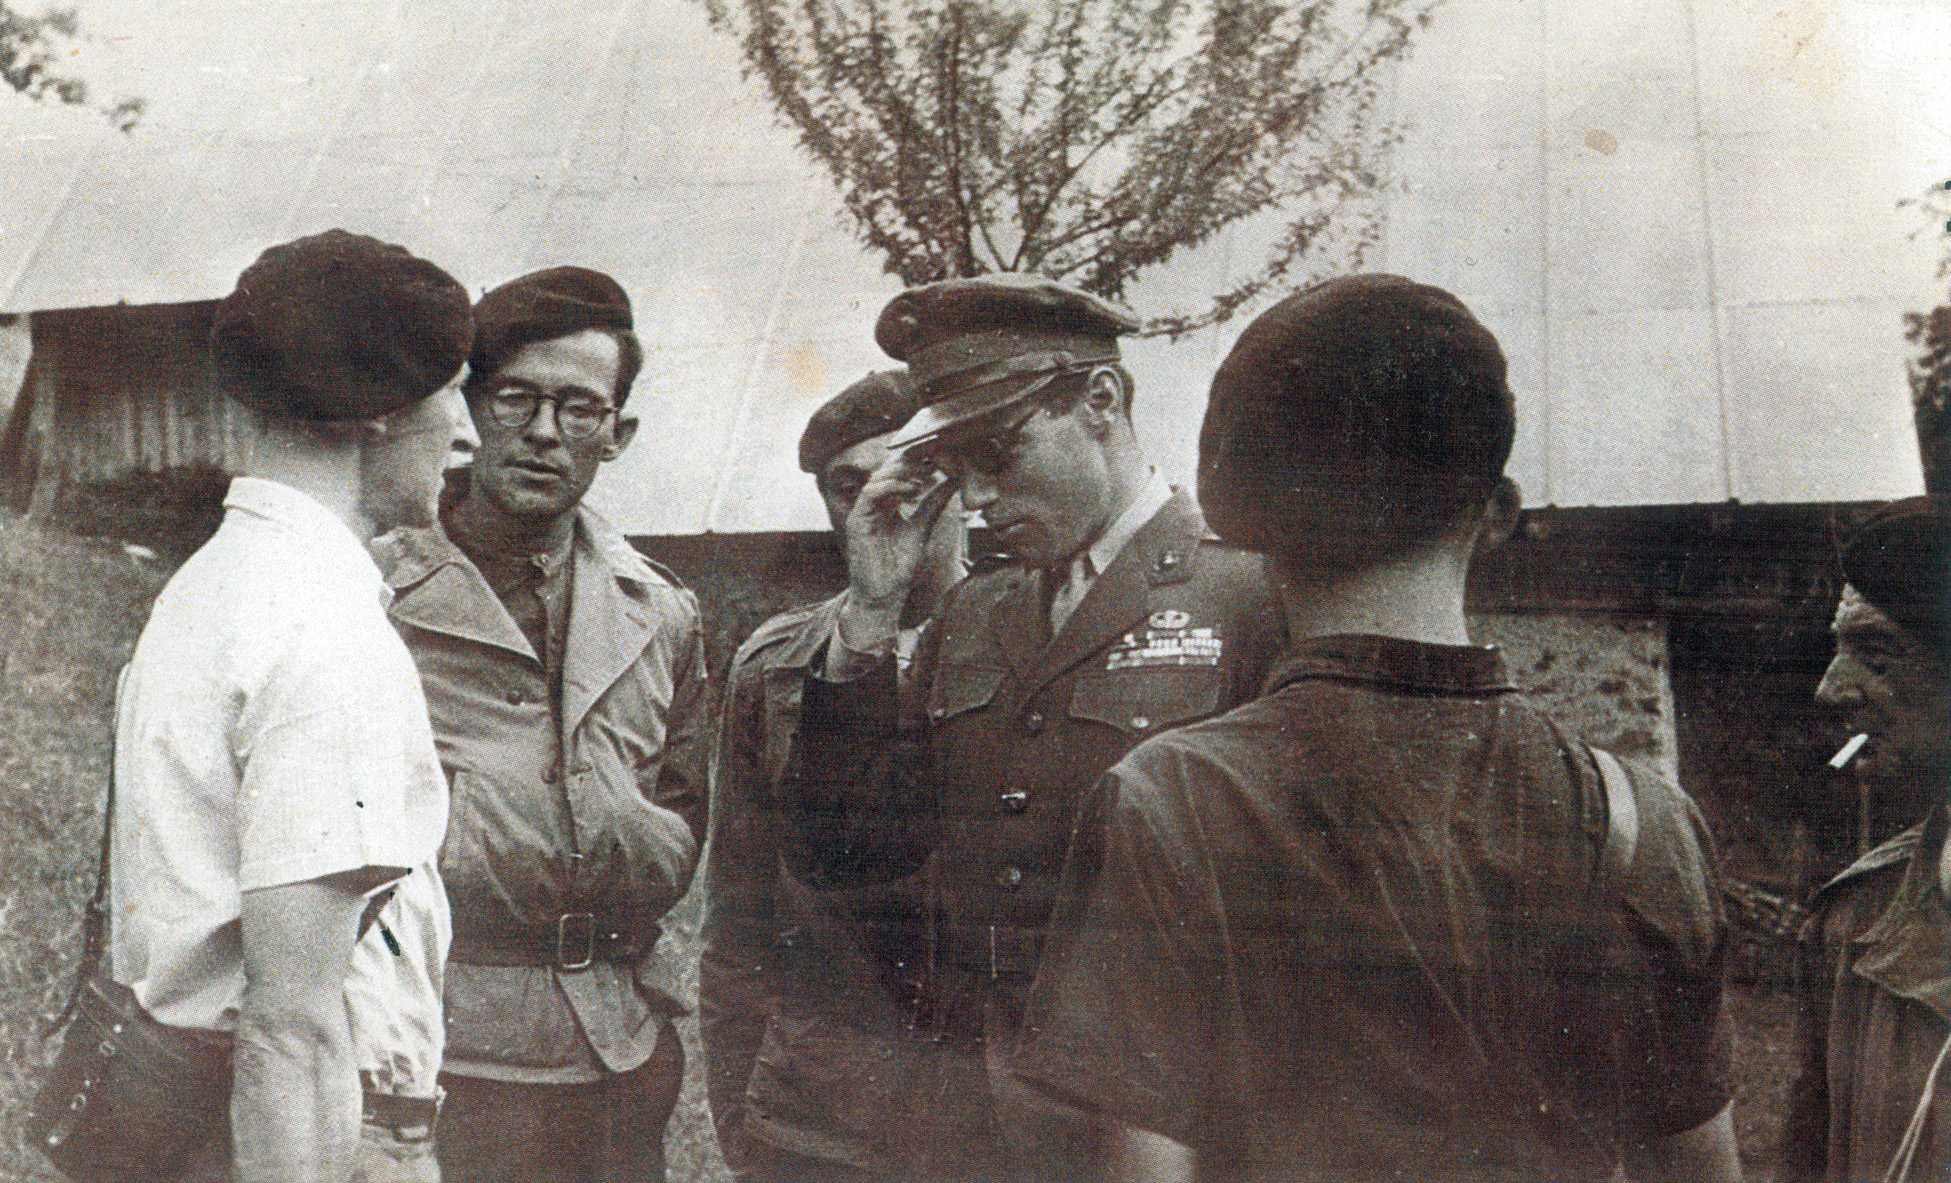 Major Peter Ortiz (center with sunglasses) discusses Operation Union with a group of French Resistance fighters. 